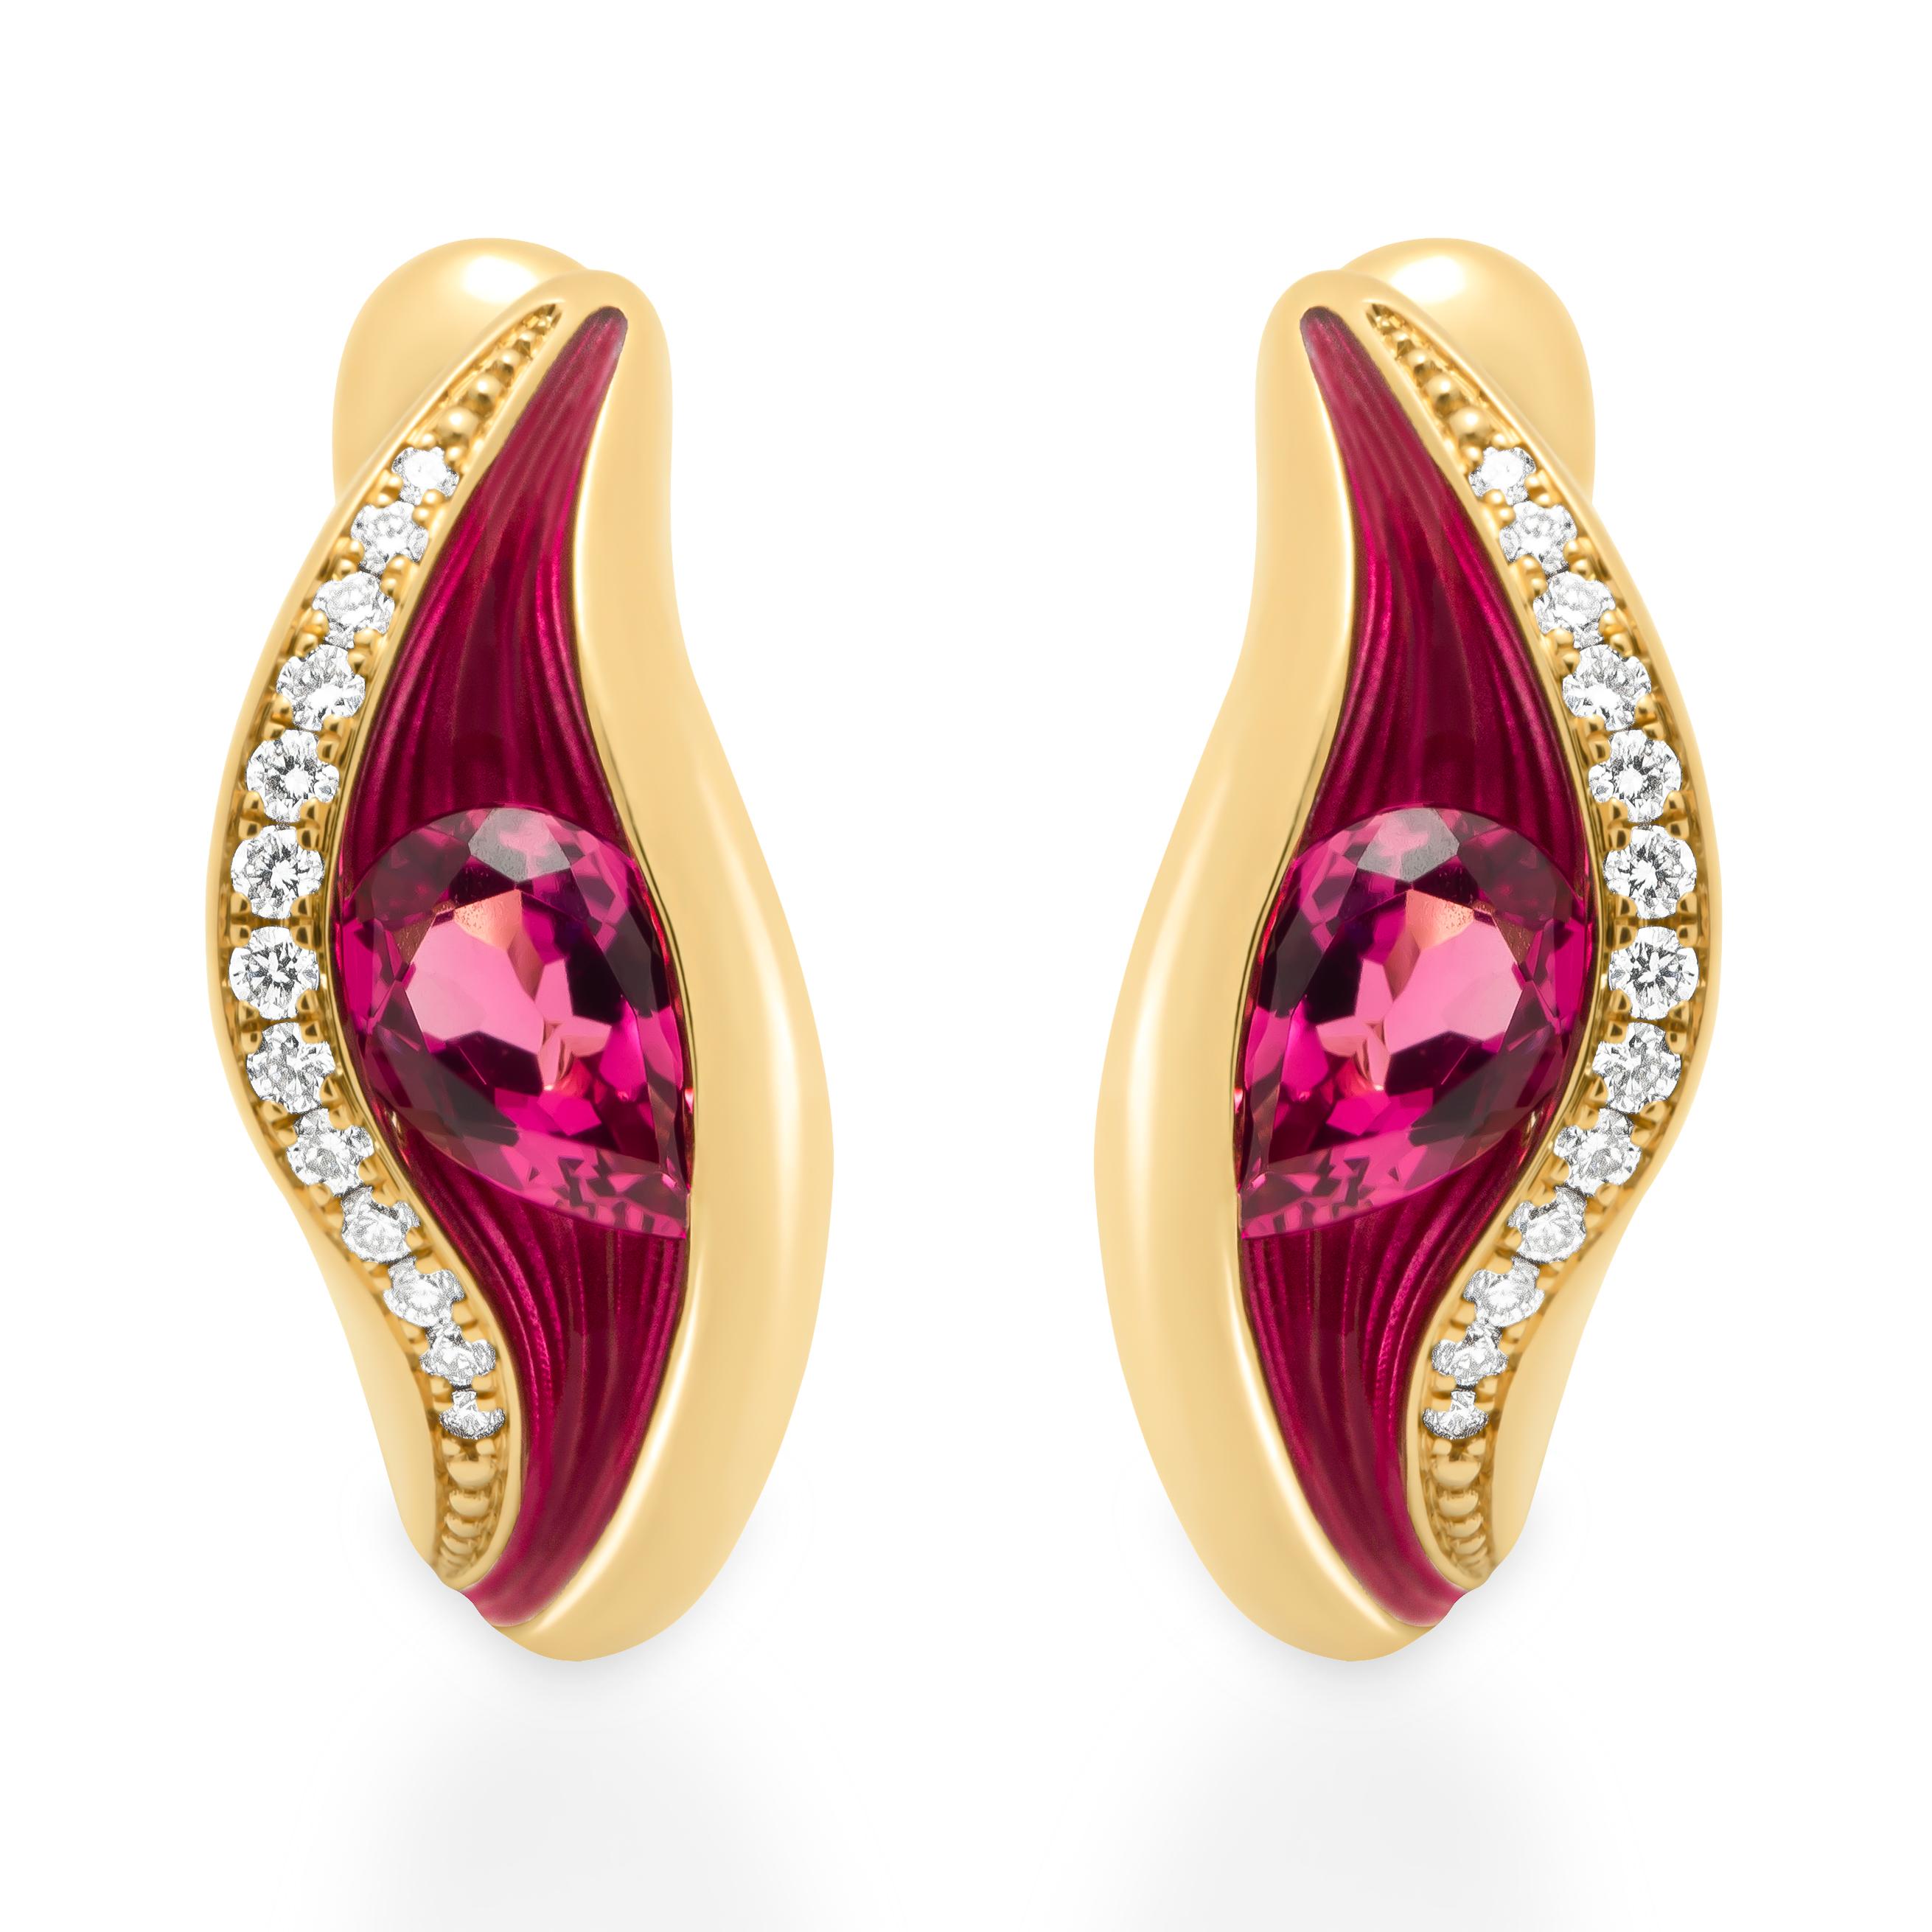 Pink Tourmaline Diamonds Enamel 18 Karat Yellow Gold Melted Colors Suite
Our new collection 